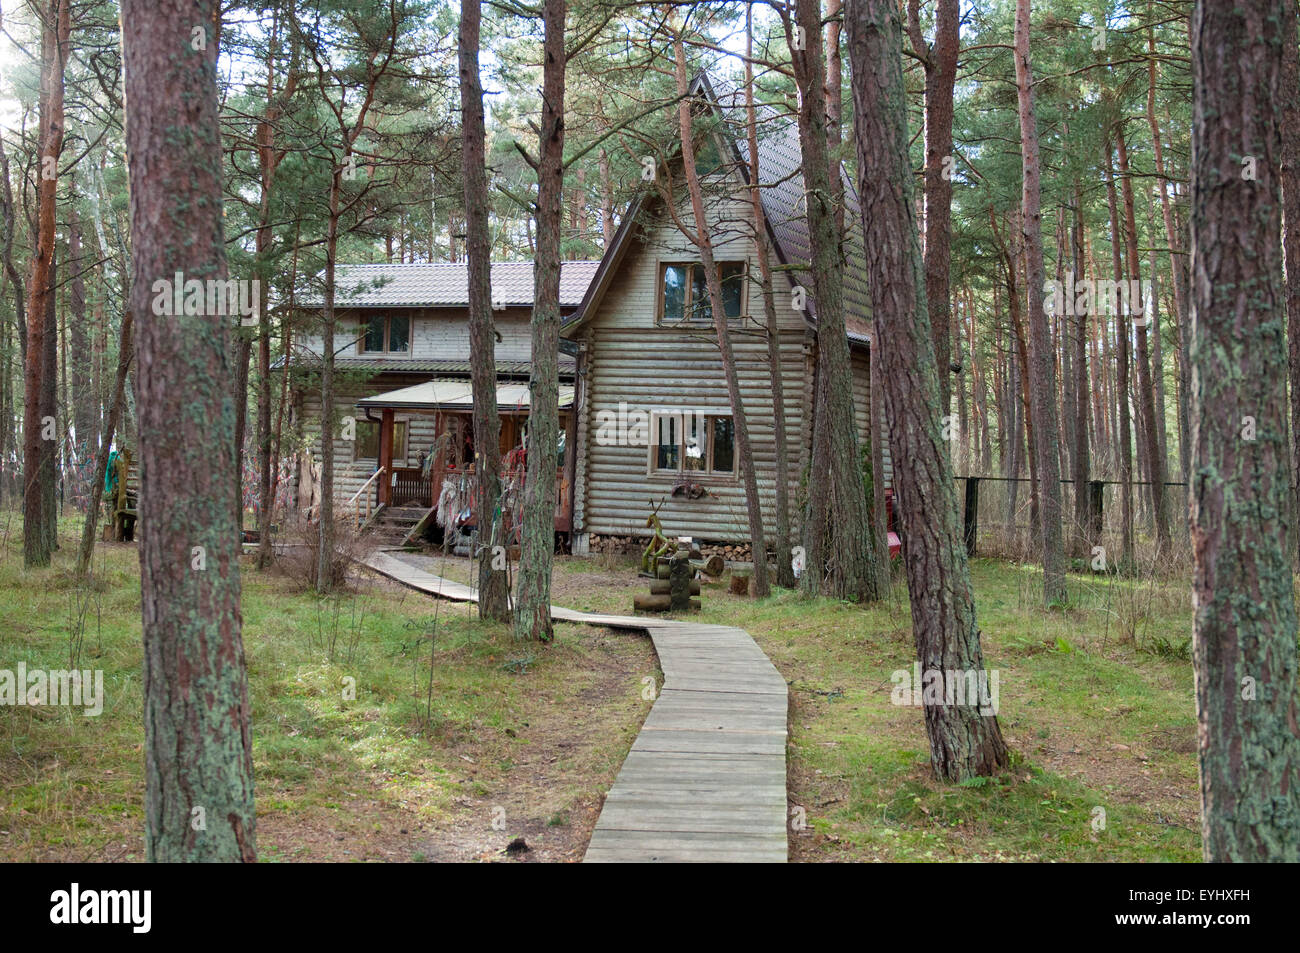 Old wooden house in the woods. Autumn season. Pine forest. Stock Photo